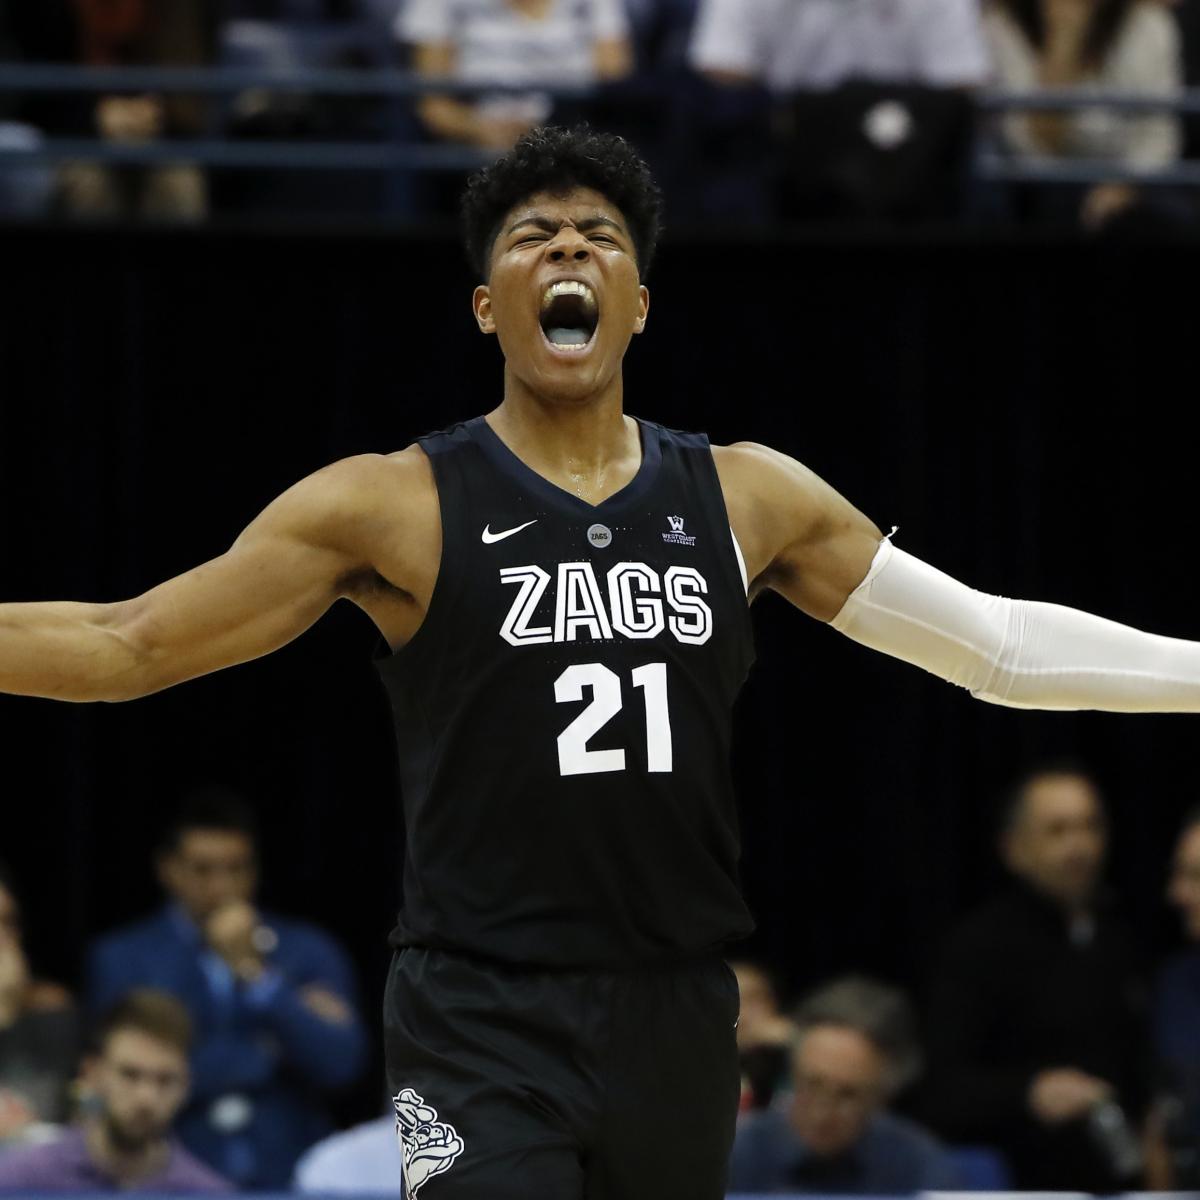 2019 NCAA Tournament Bracket: Latest Projection of the Field of 68 | Bleacher Report ...